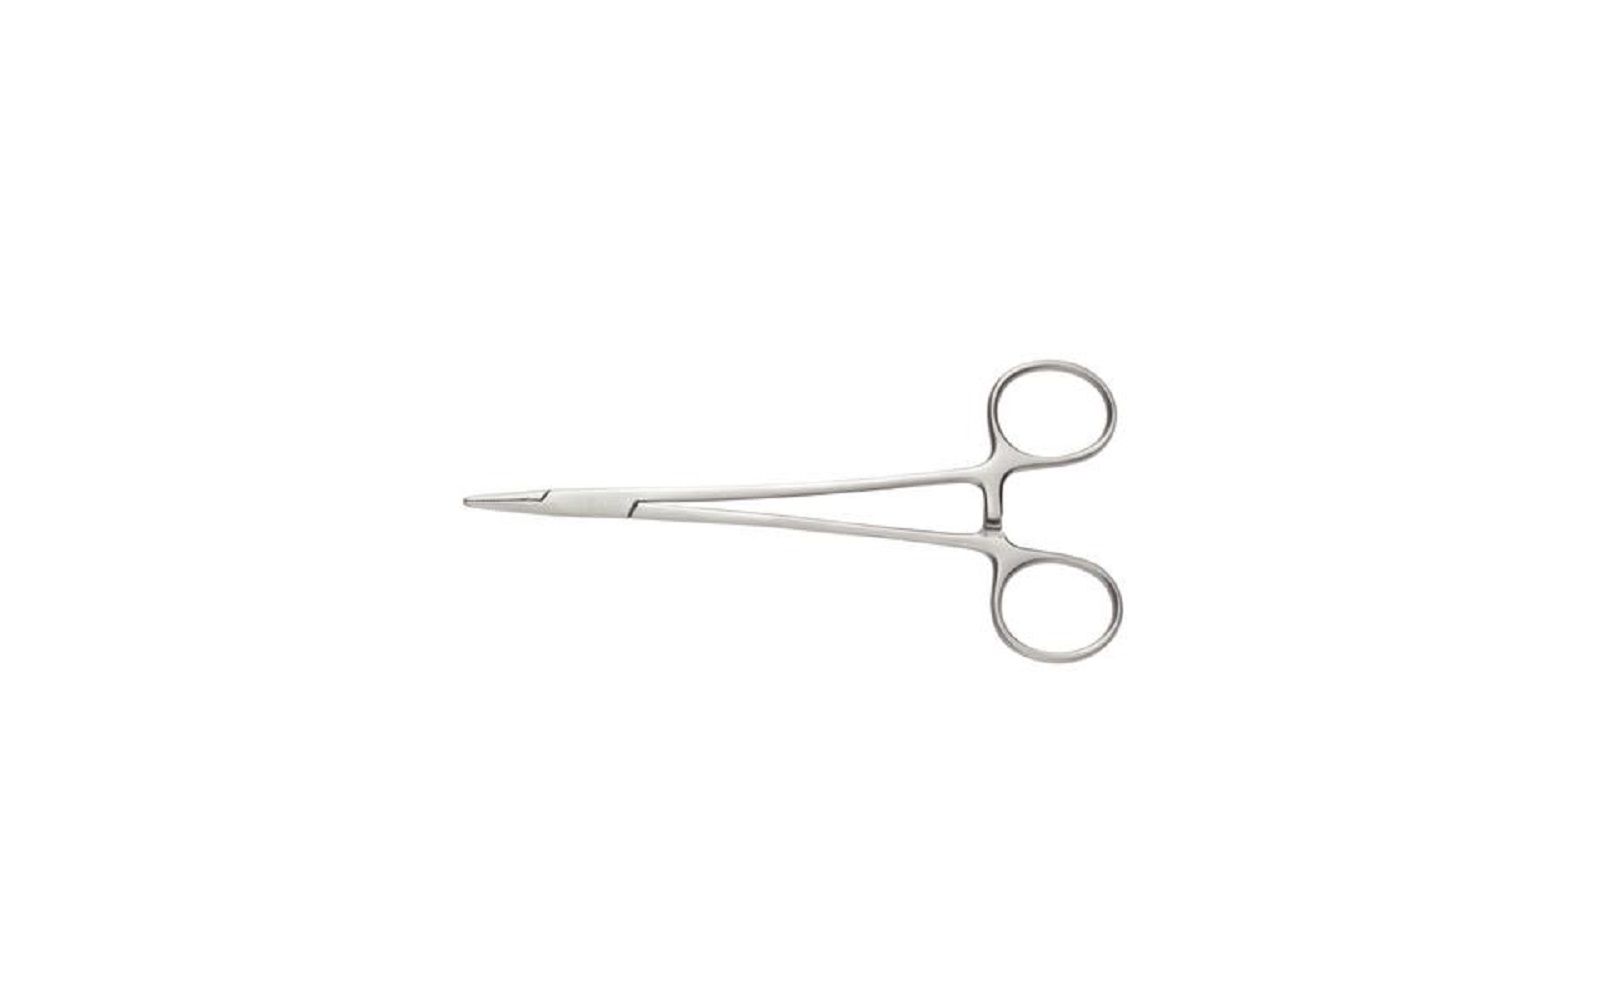 Needle holder – # 204, crile-wood, stainless steel jaws, 6"